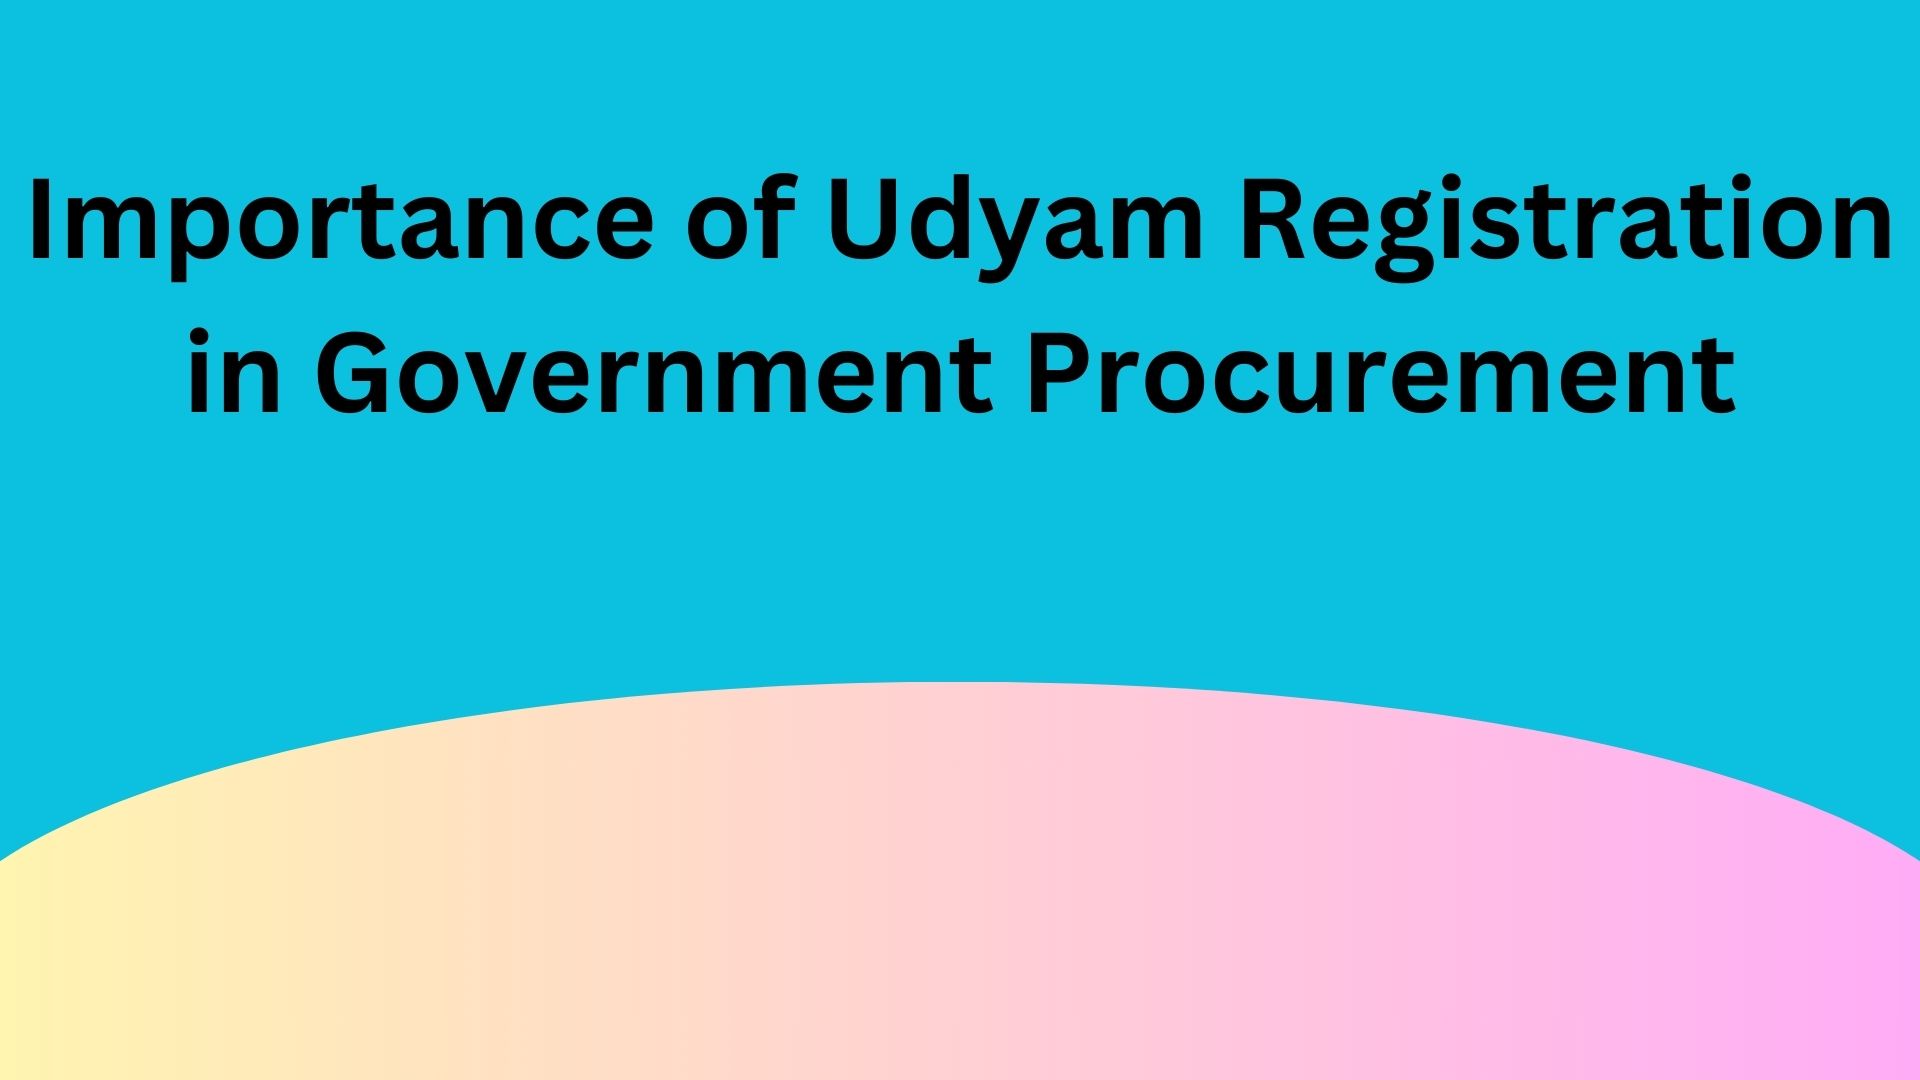 Importance of Udyam Registration in Government Procurement